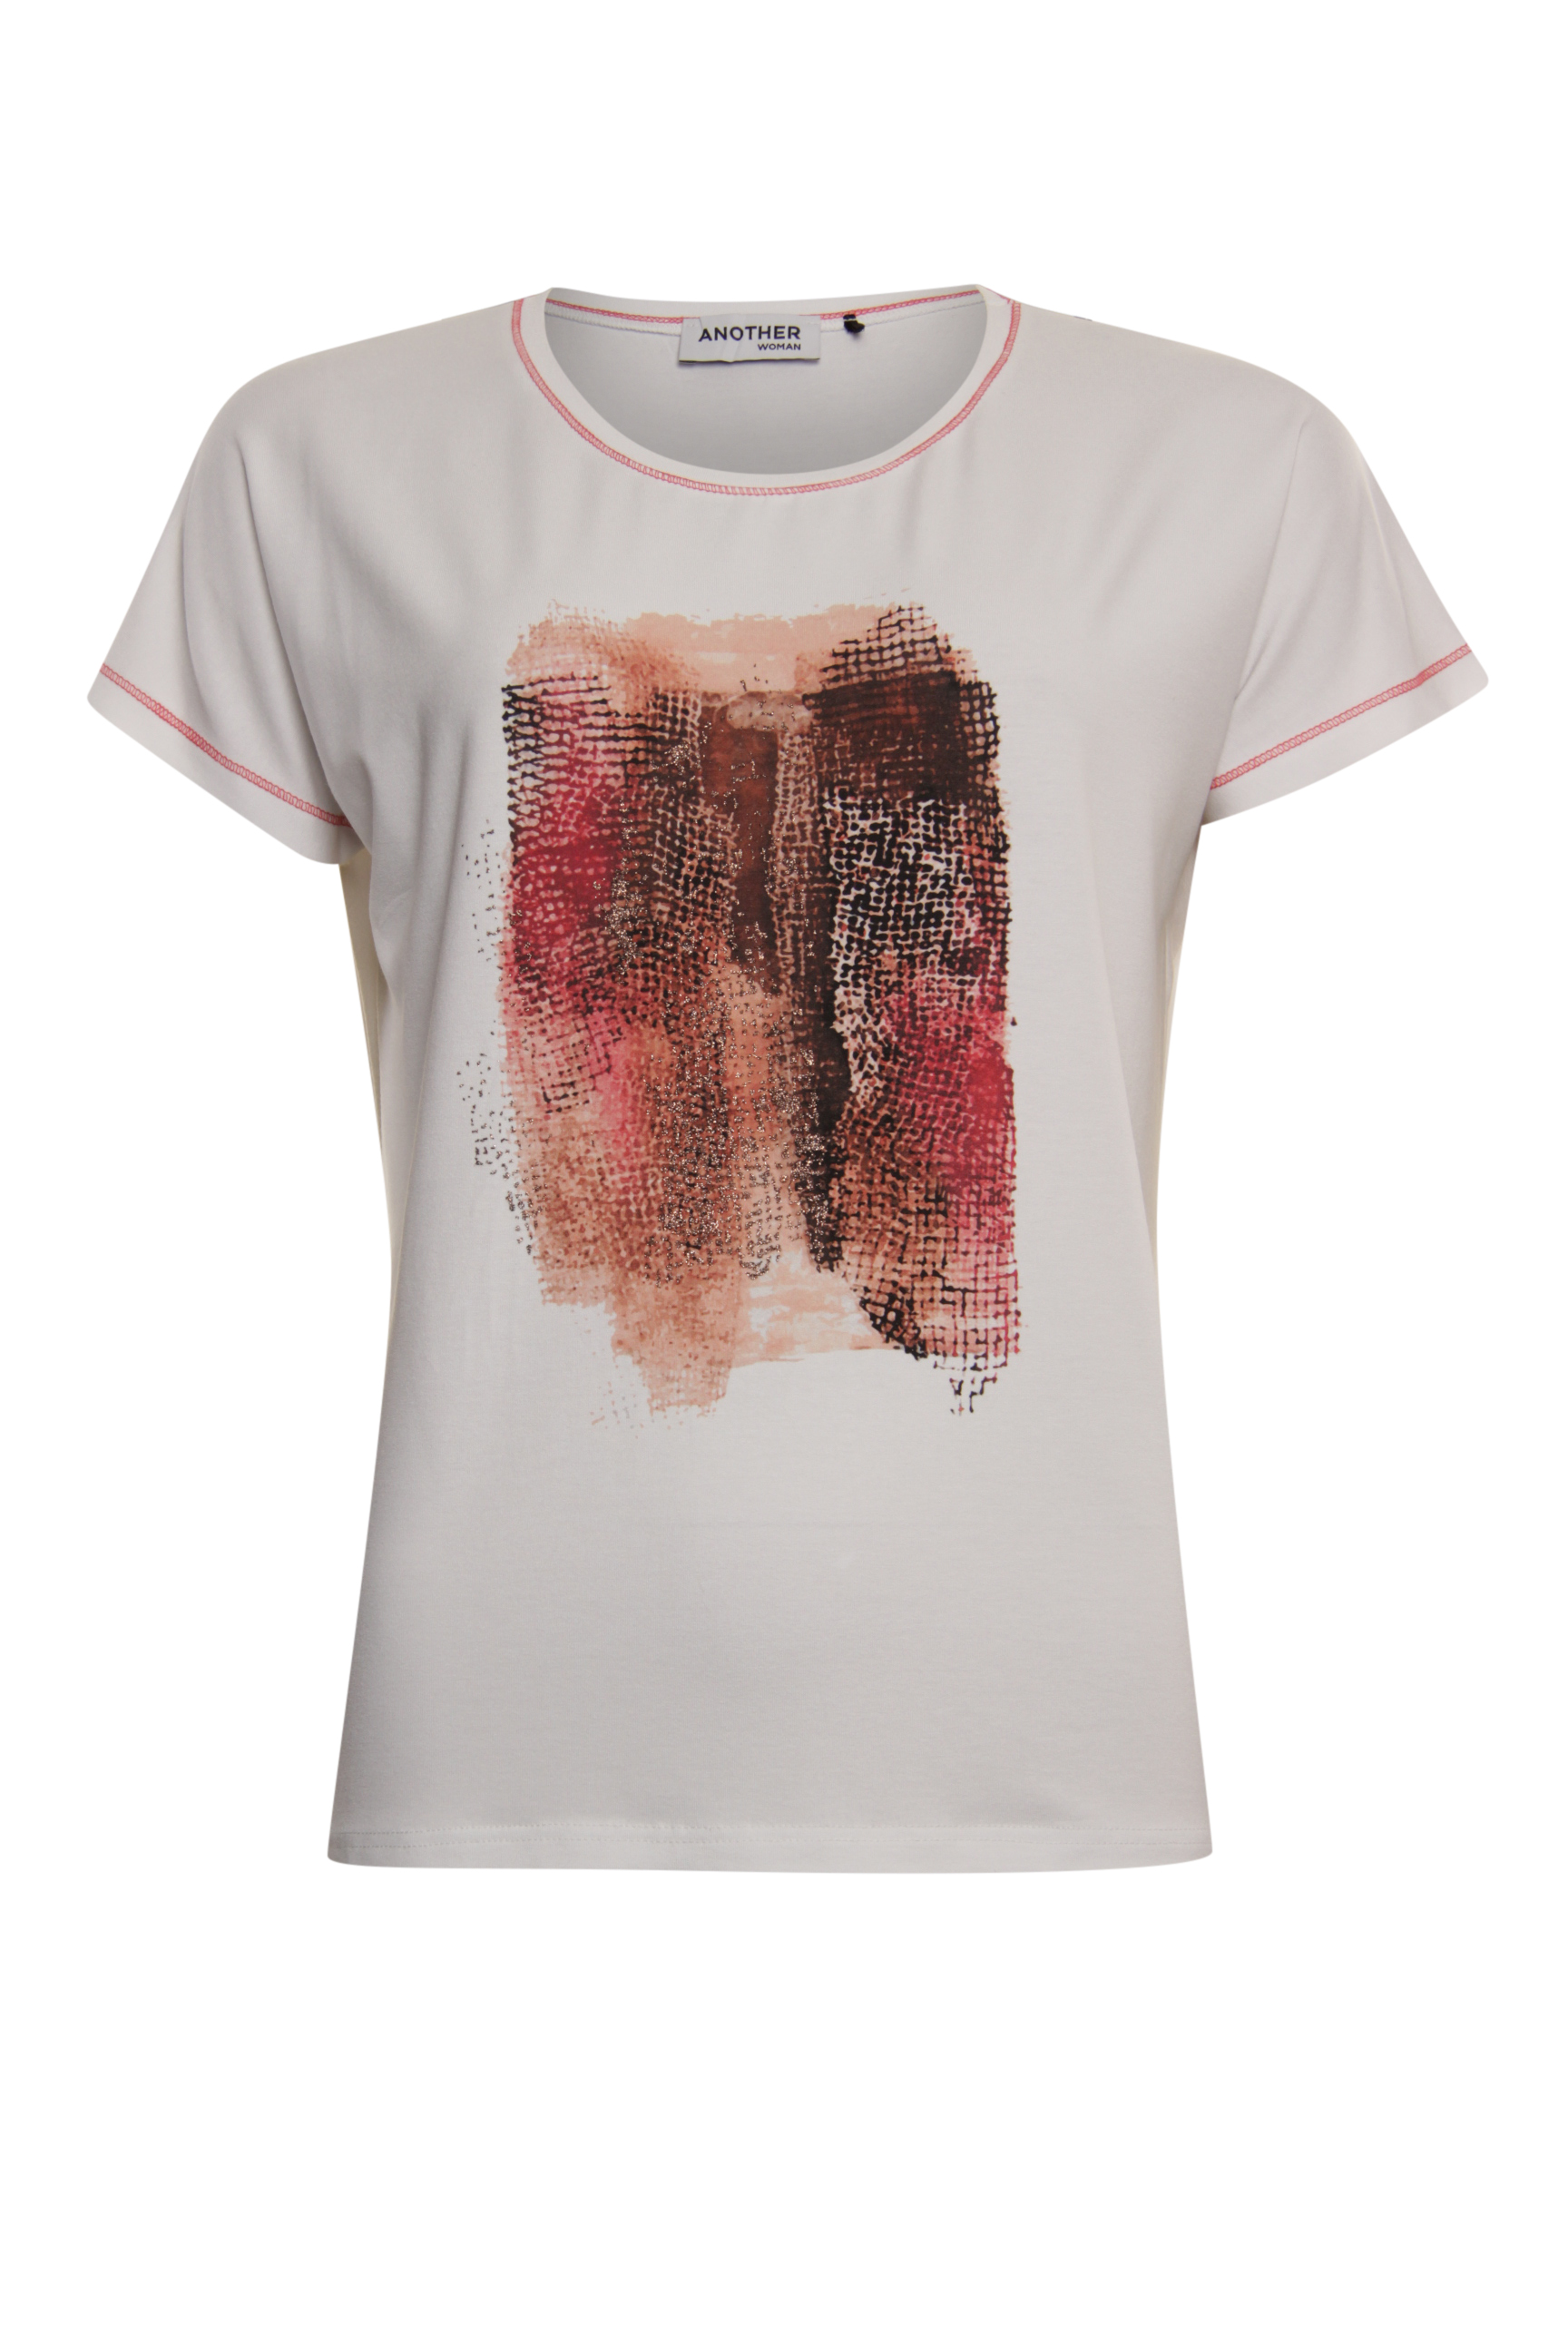 Another Woman  Wit T-shirt frontprint 